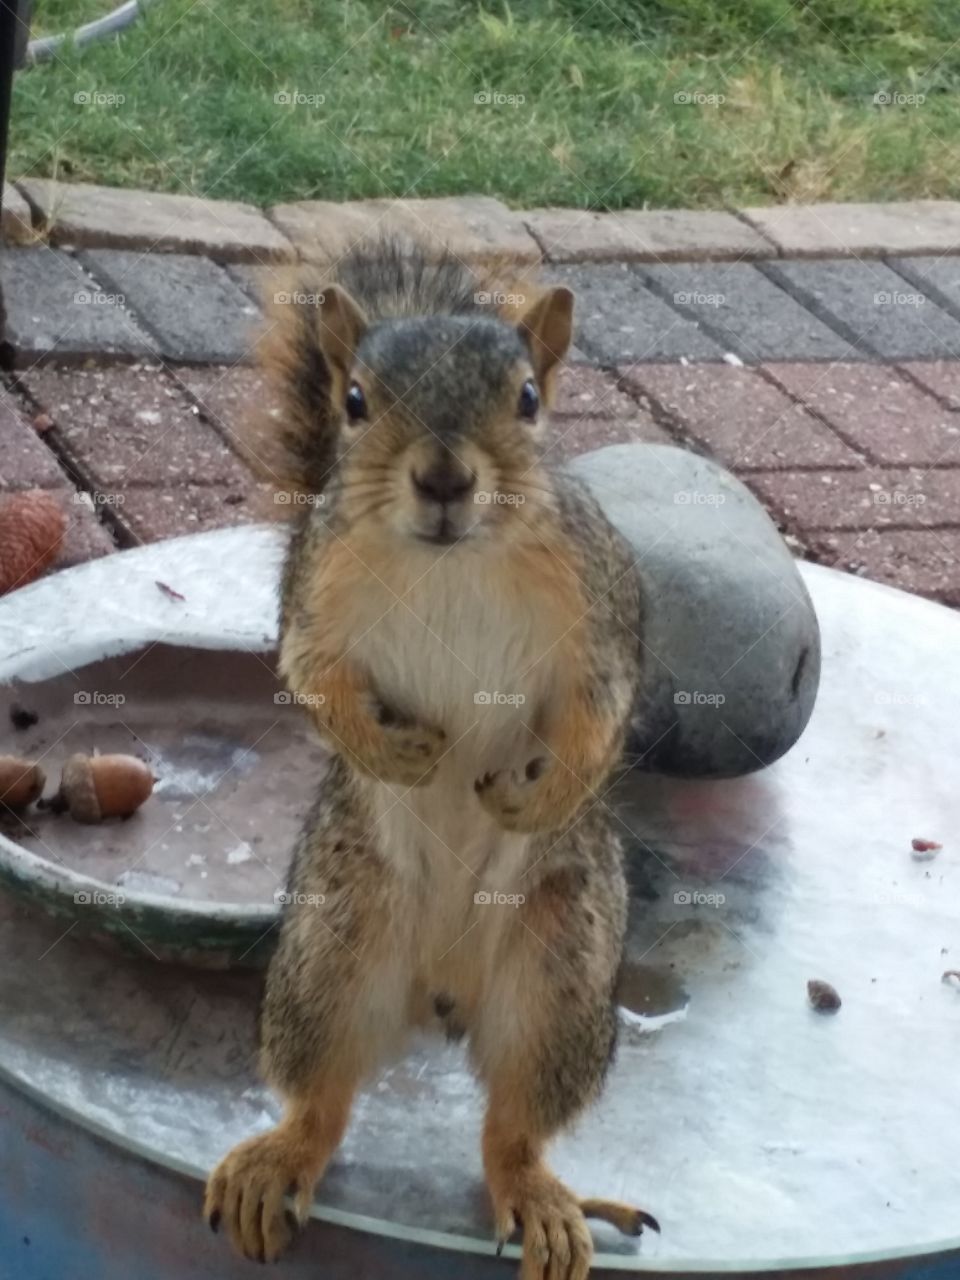 Curious squirrel is very amusing!